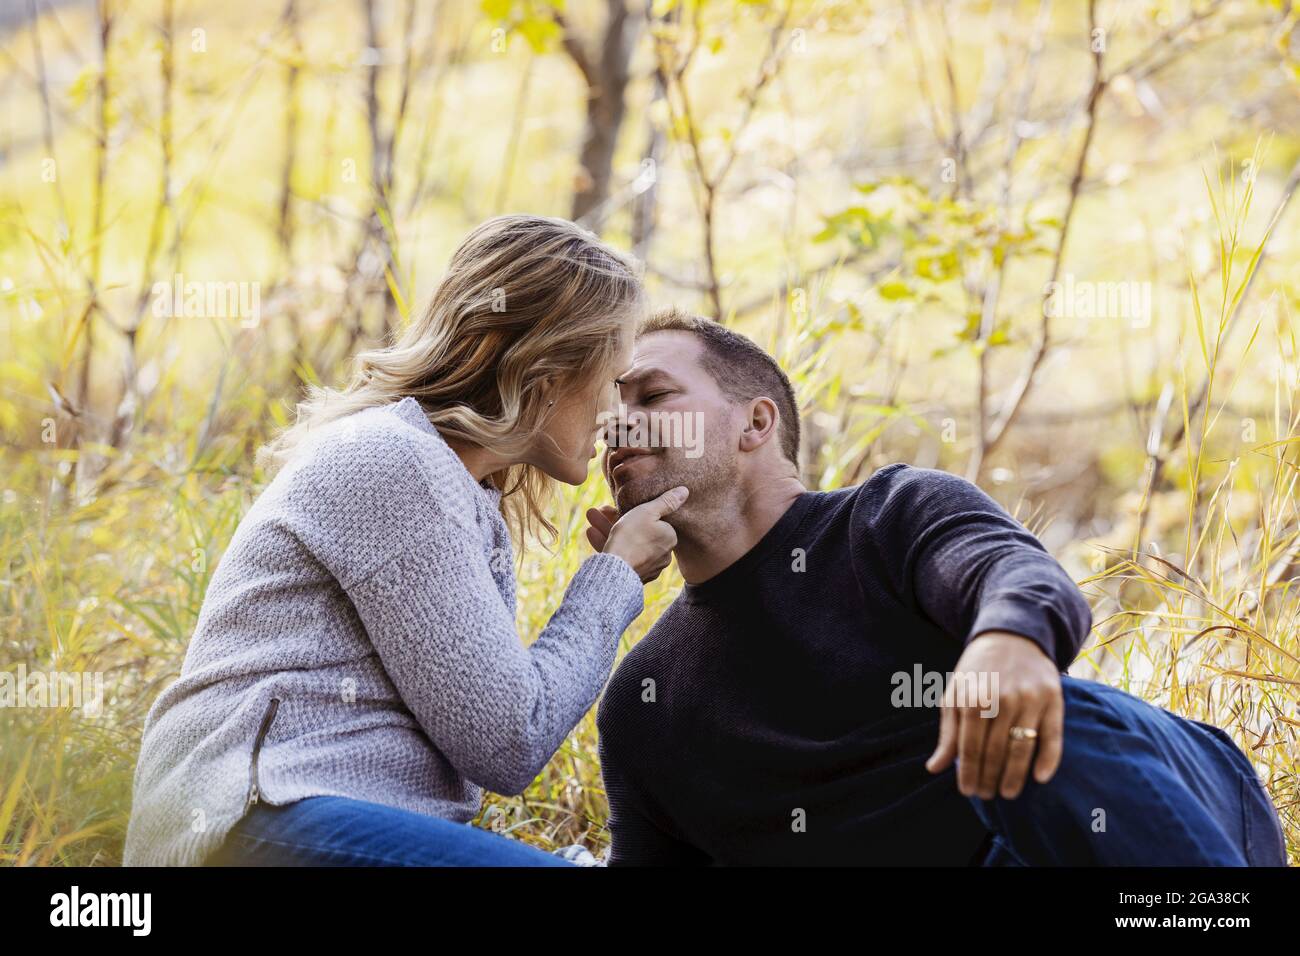 A mature married couple spending quality time together in a city park during the fall season; St. Albert, Alberta, Canada Stock Photo